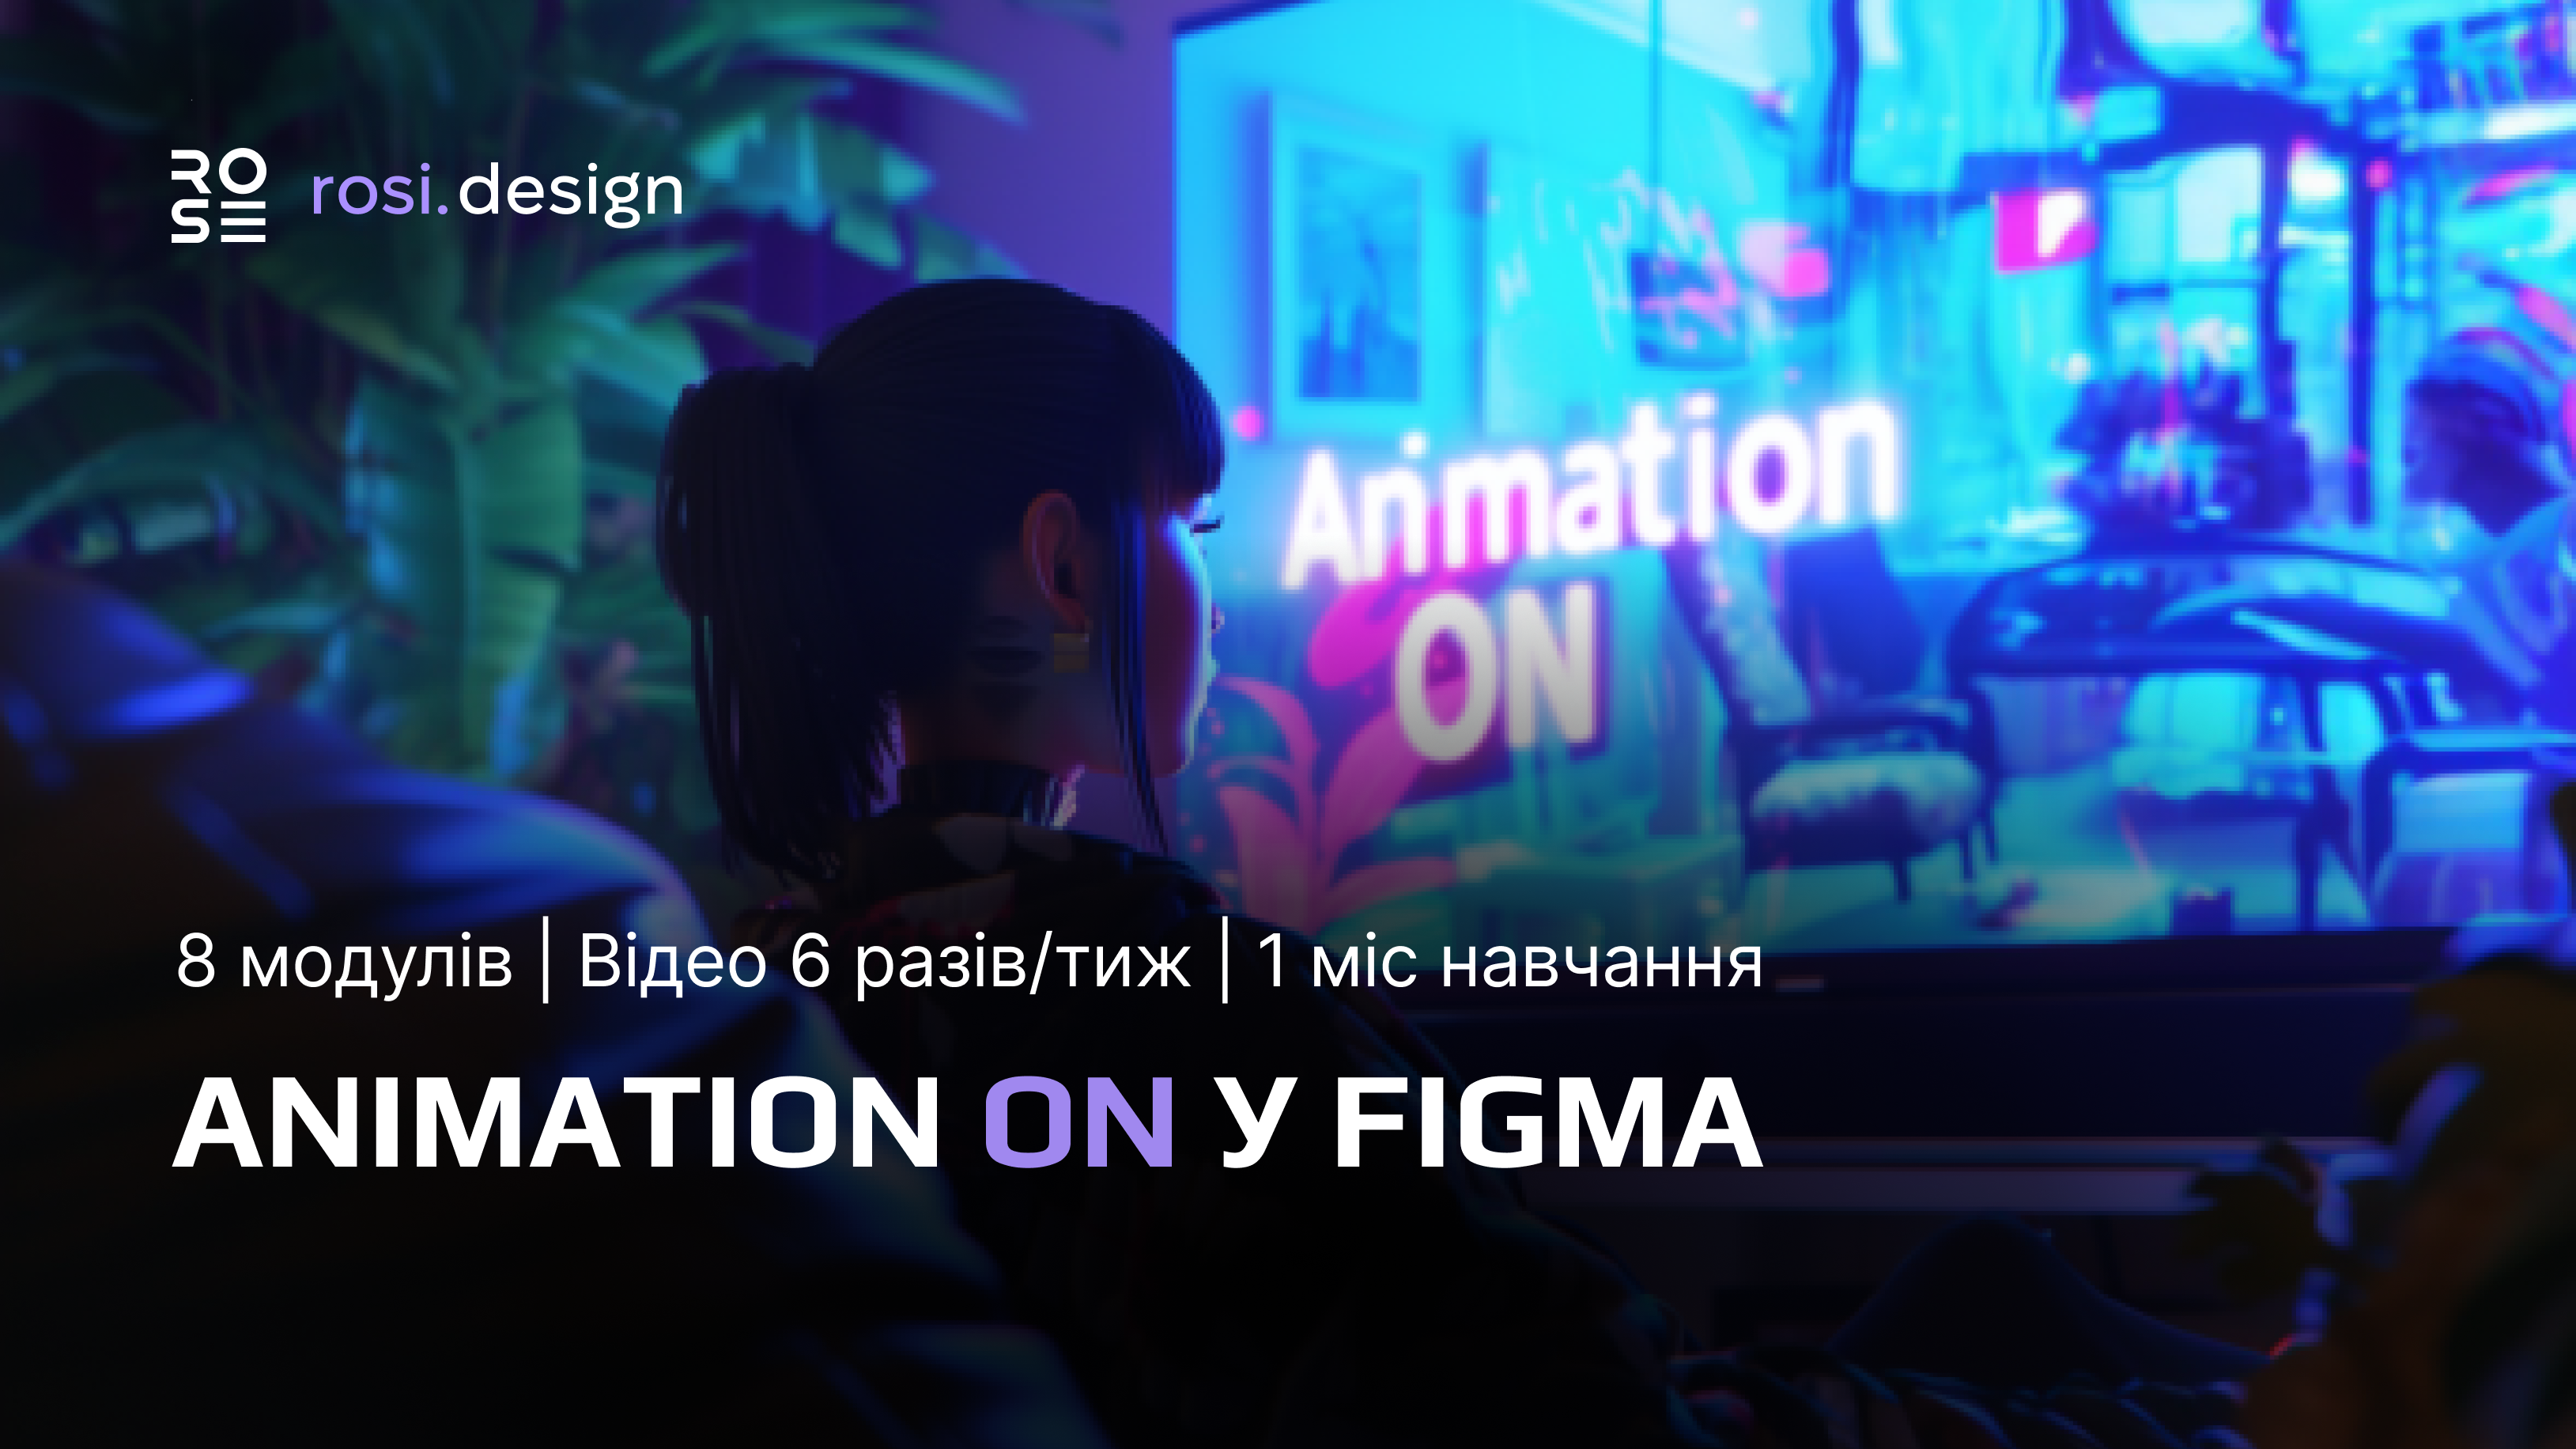 Animation ON in Figma